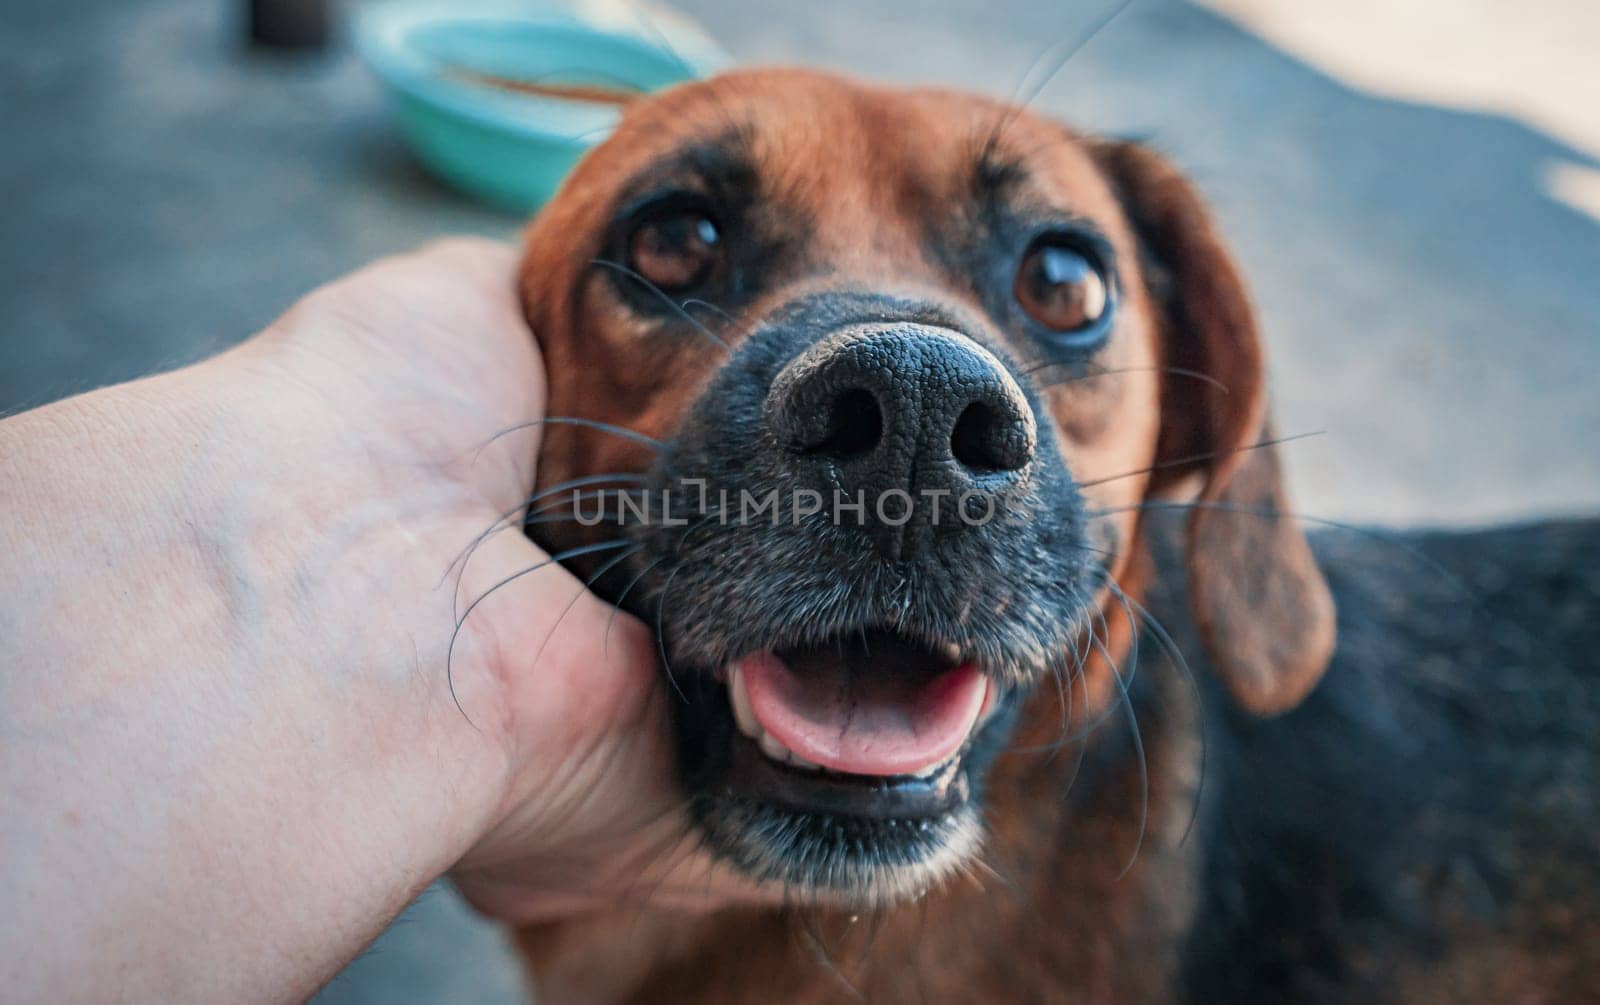 Male hand petting caged stray dog in pet shelter. People, Animals, Volunteering And Helping Concept.